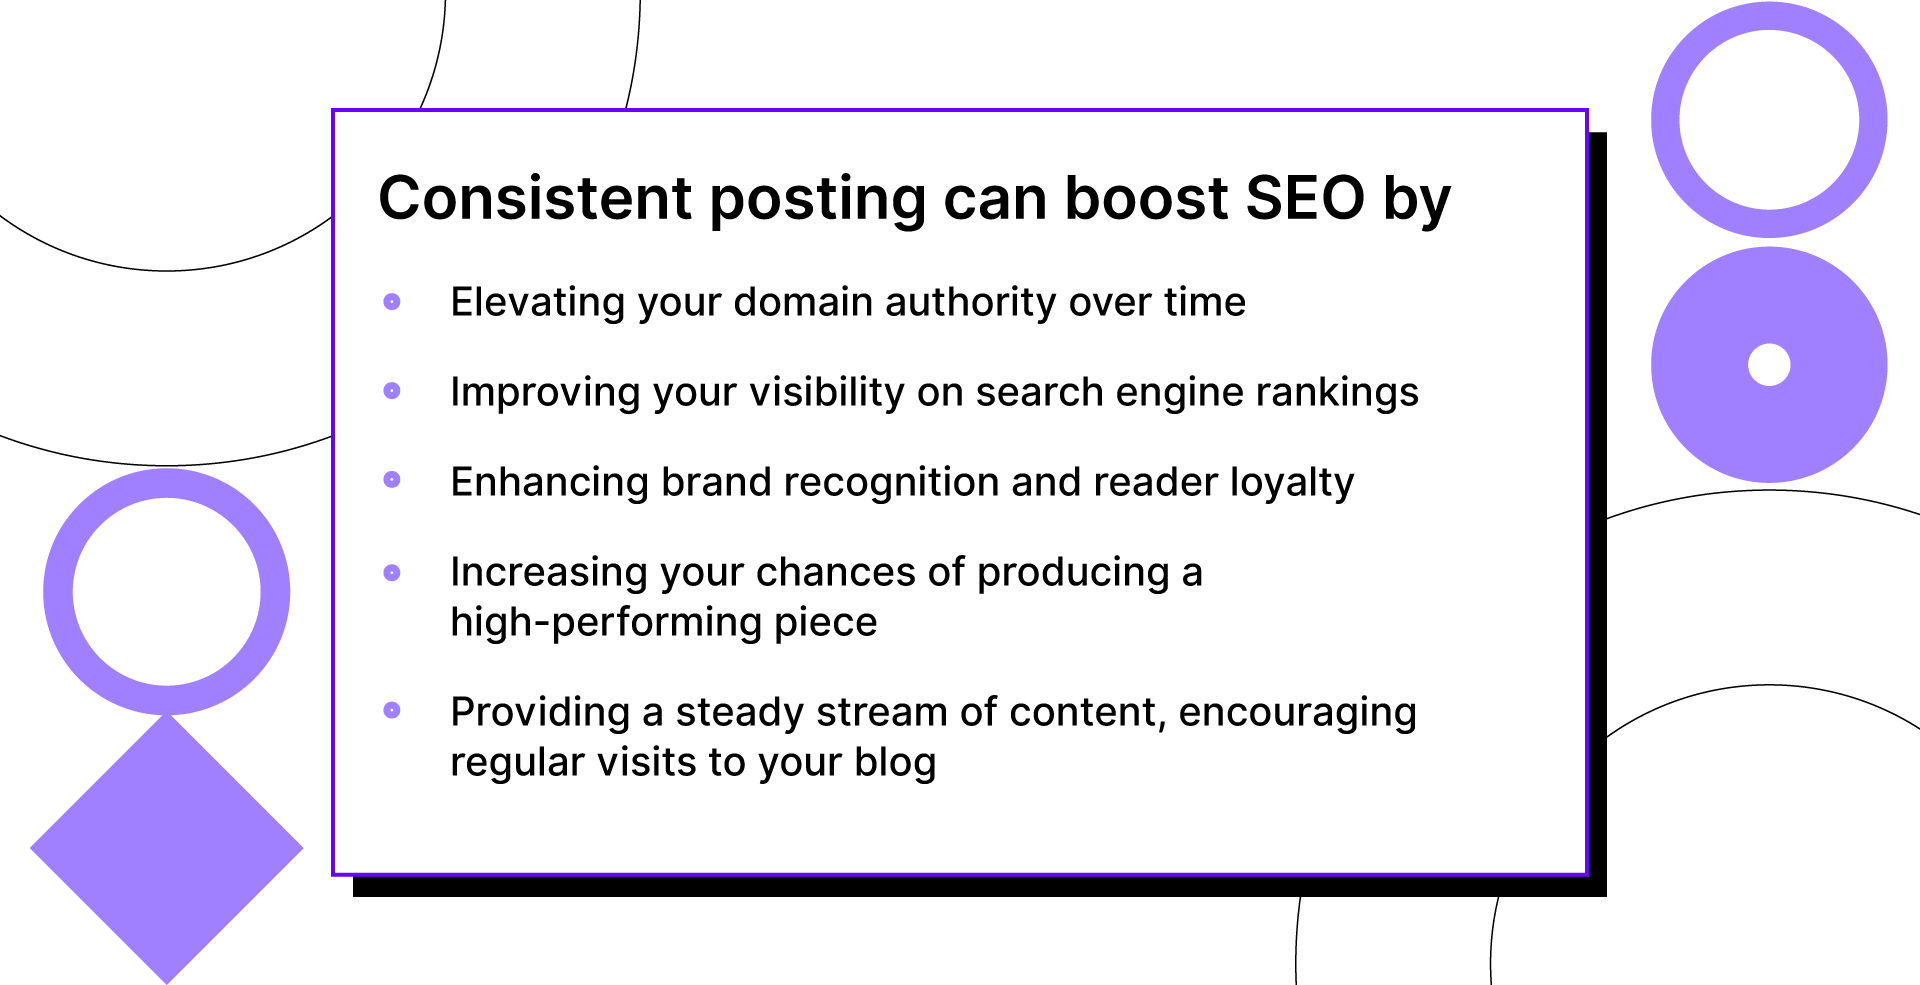 Content consistency helps improve your blog’s domain authority, SEO rankings, and brand recognition.